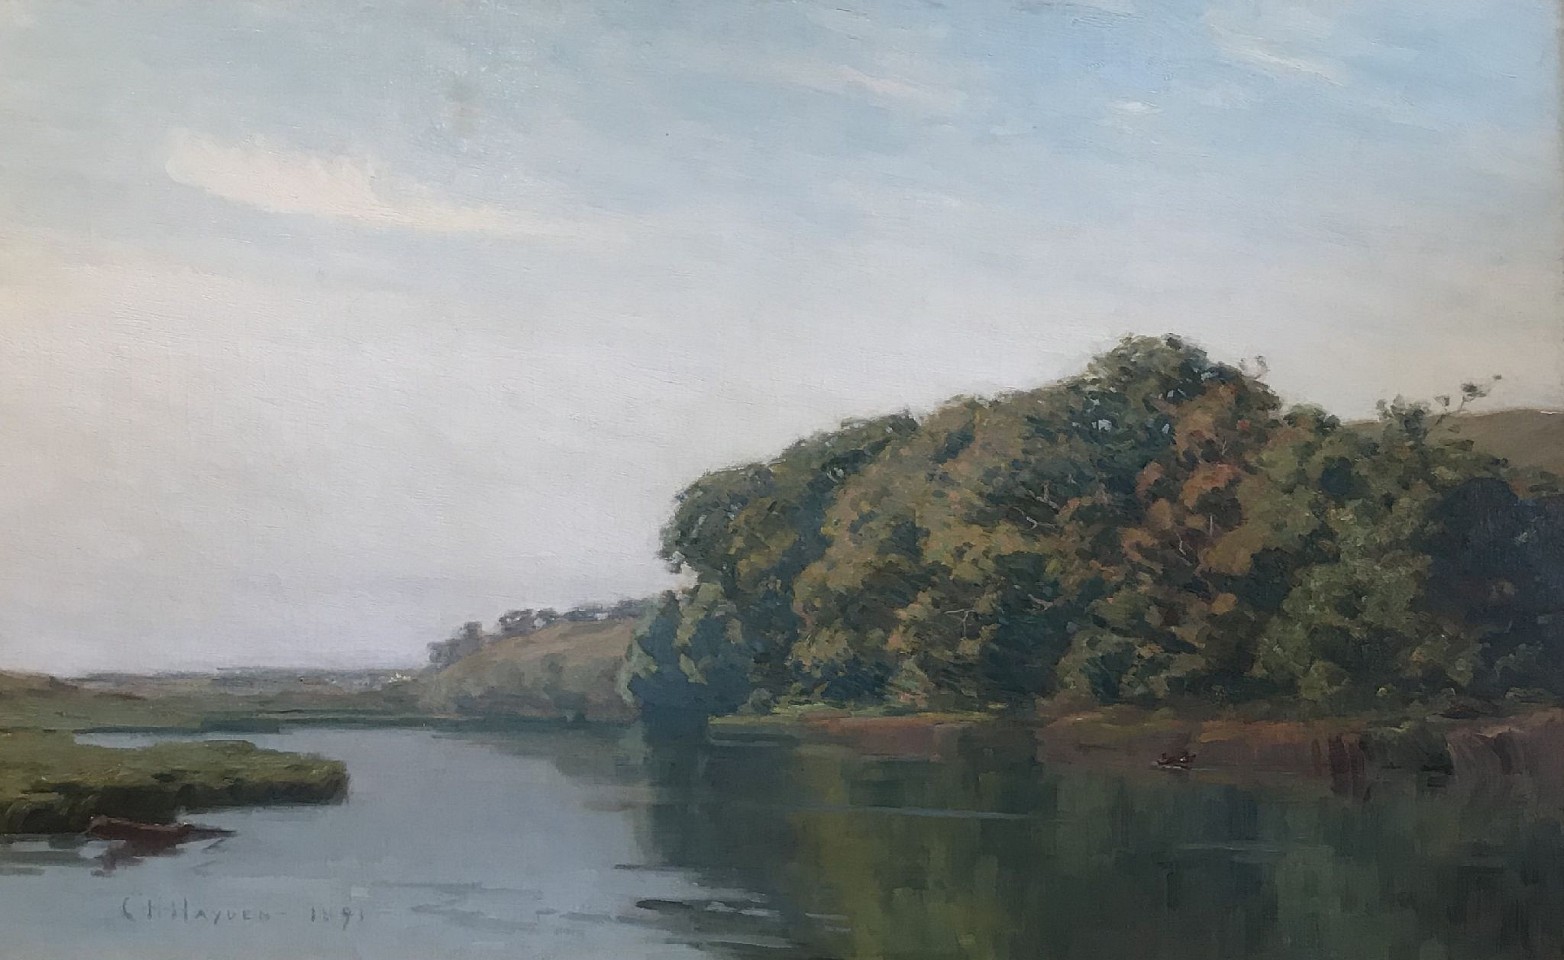 Charles H. Hayden, Summer on the Pond, 1891
oil on canvas, 26" x 42"
signed C. H. Hayden an ddated 1891. l.l.
DY 0419.02
$8,500